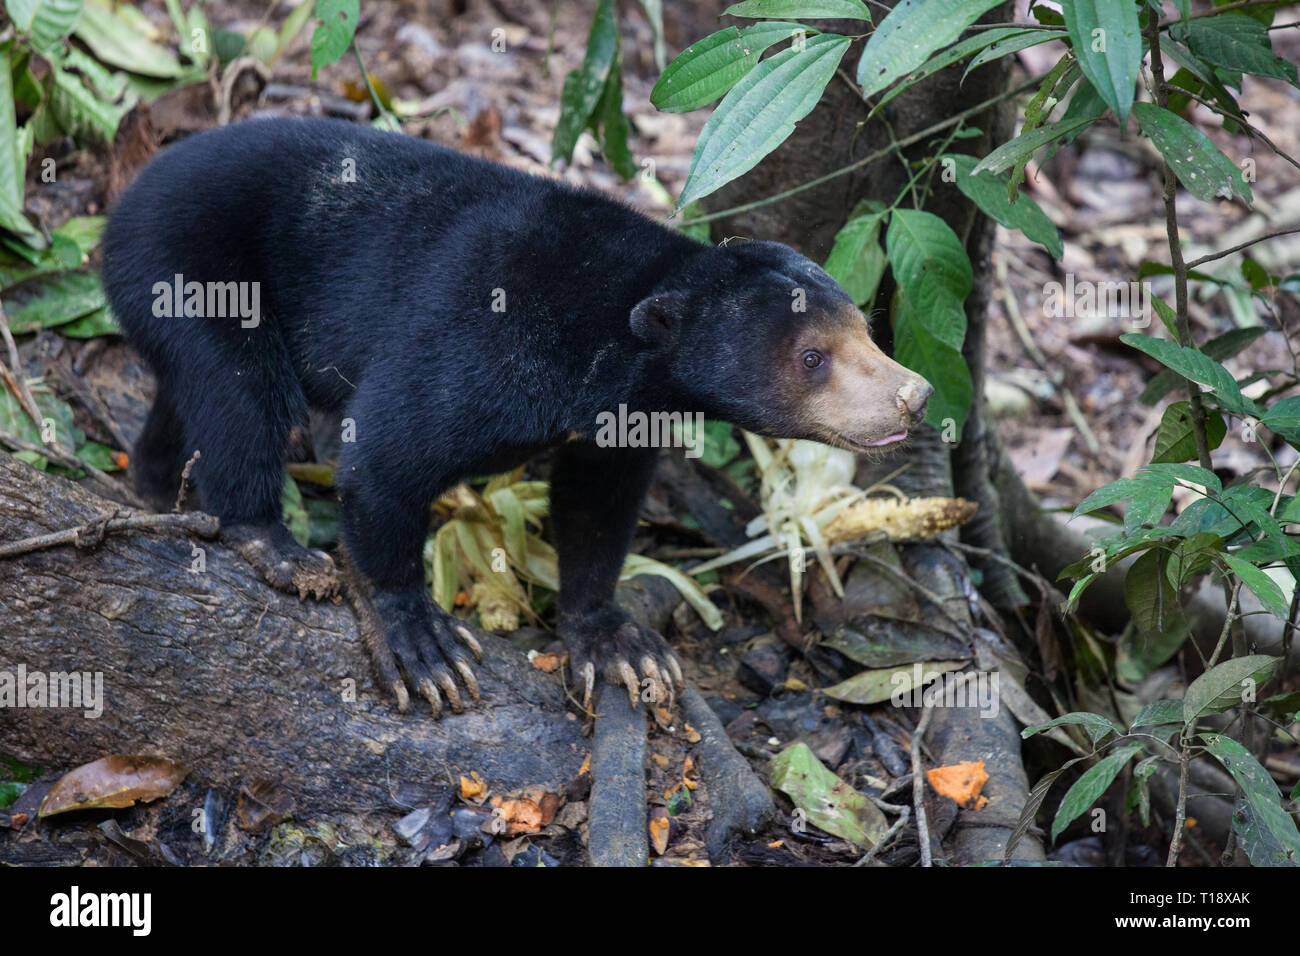 Sun bear, Helarctos malayanus, the smallest bear in the world, the sun bear native to the rainforests of South east Asia, a very talented tree climber Stock Photo